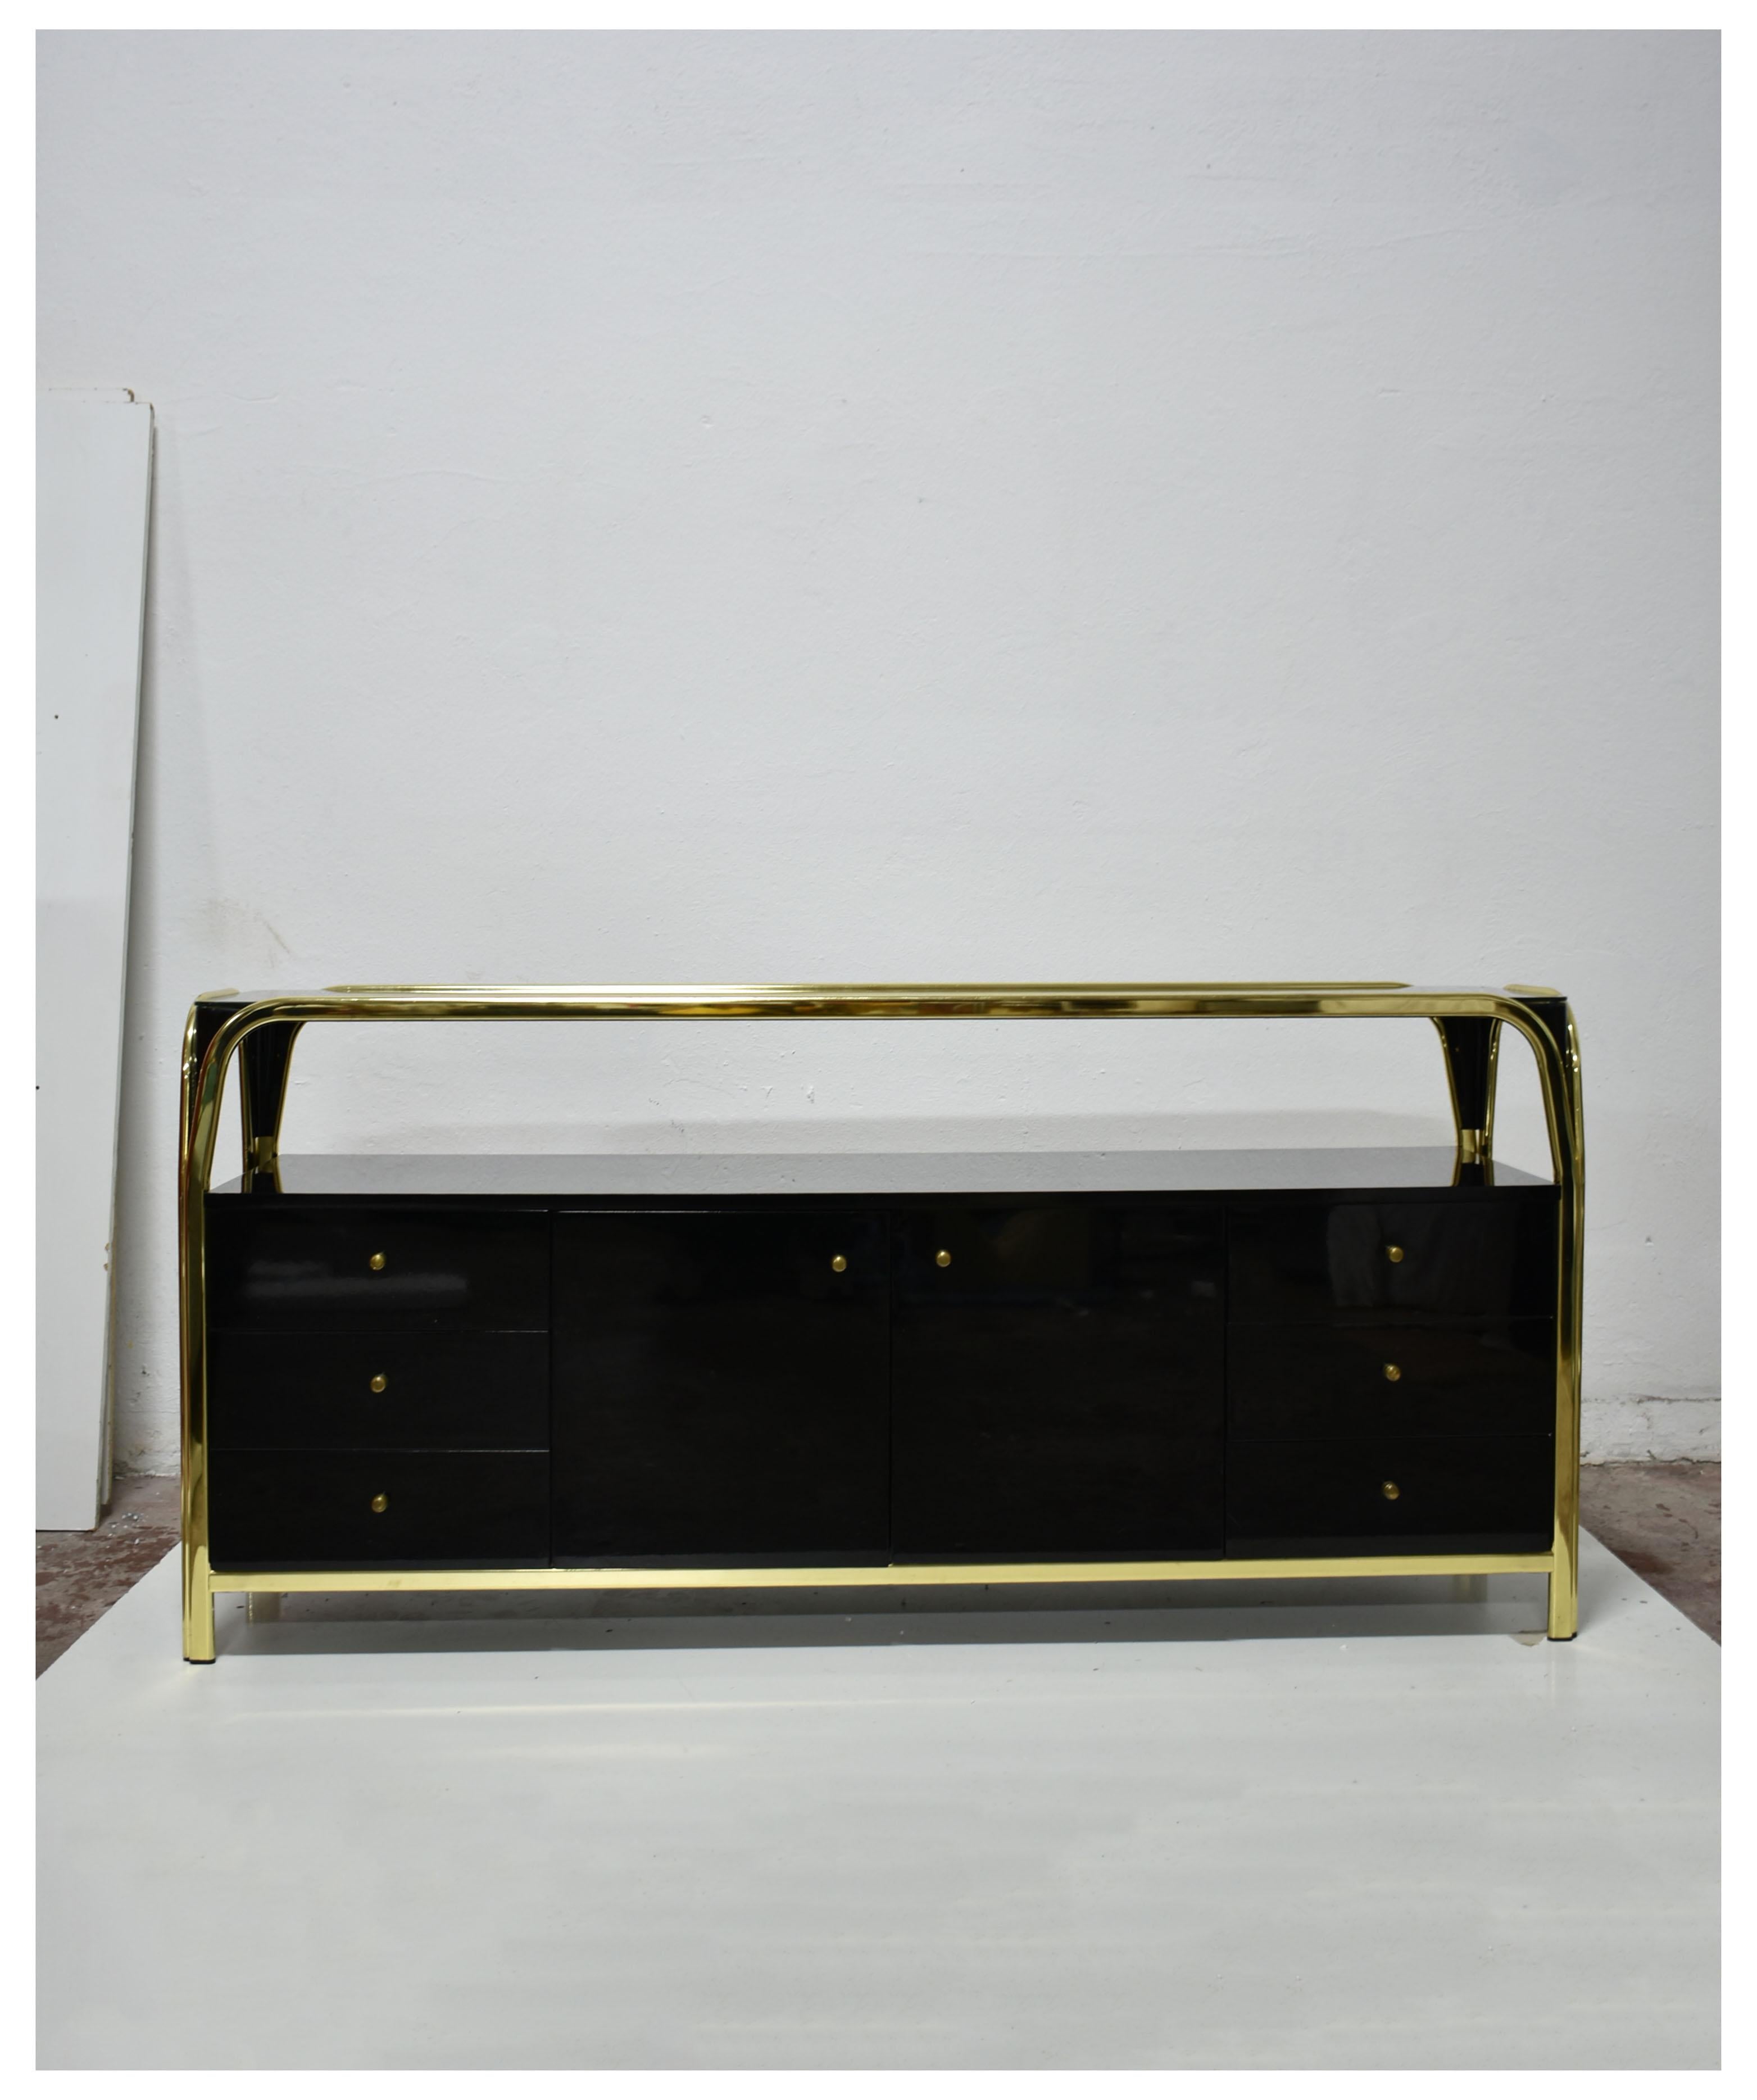 Italian mid-century sideboard from an unknown designer and manufacturer.

The sideboard features a brass plated metal frame and storage made of black lacquered wood with a shiny finish, storage is divided into 3 units. The central unit has two